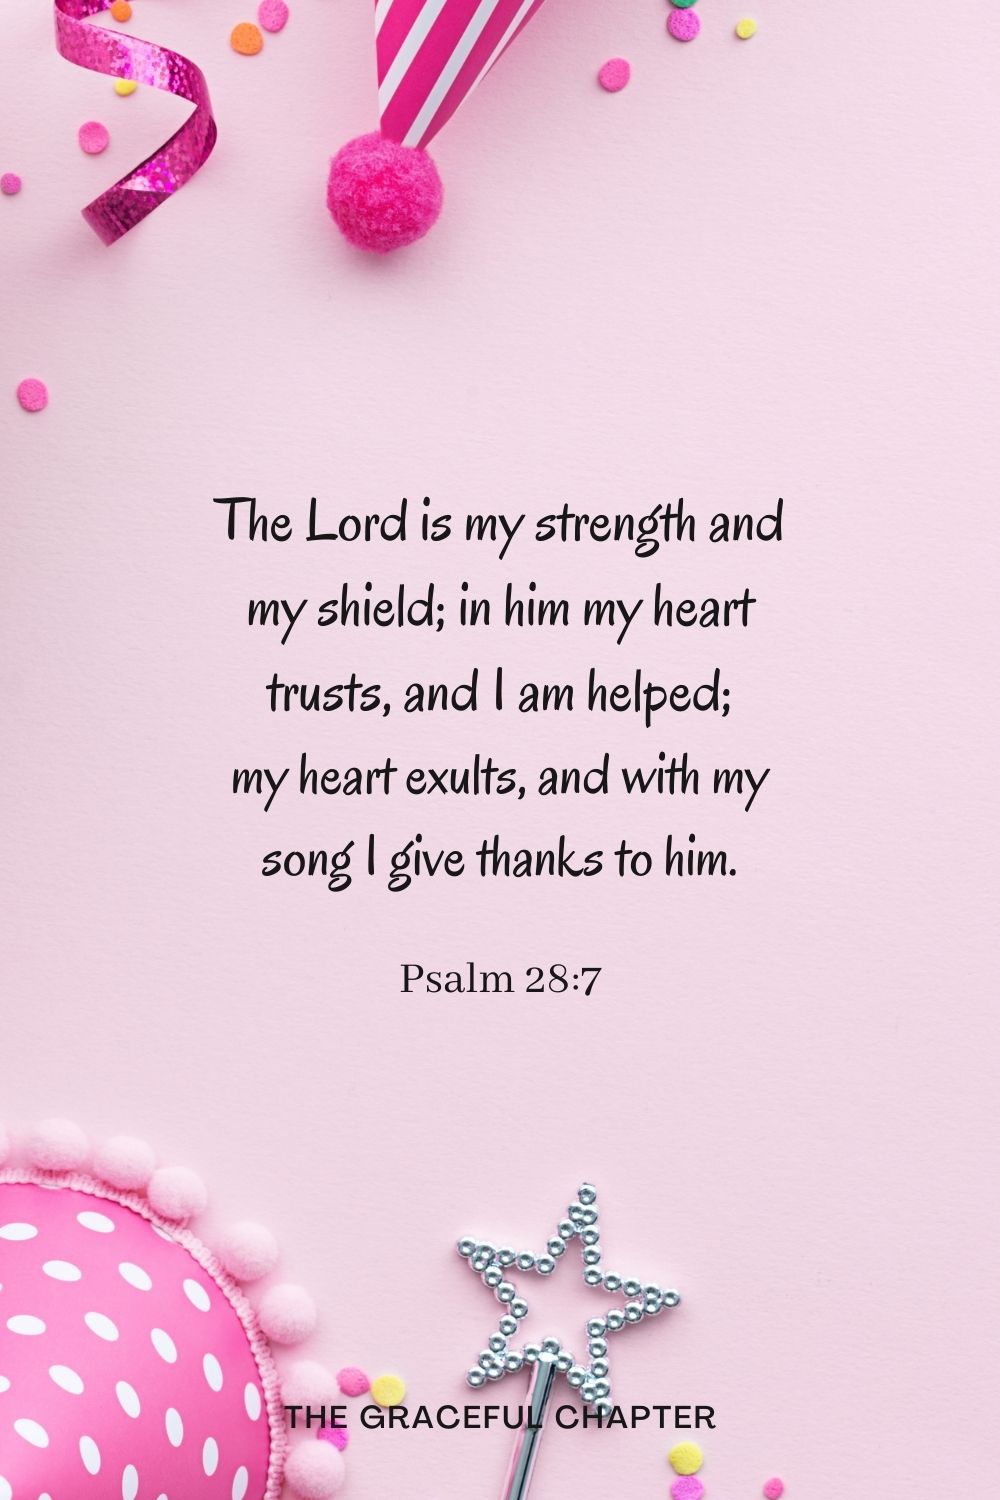 The Lord is my strength and my shield; in him my heart trusts, and I am helped; my heart exults, and with my song I give thanks to him. Psalm 28:7